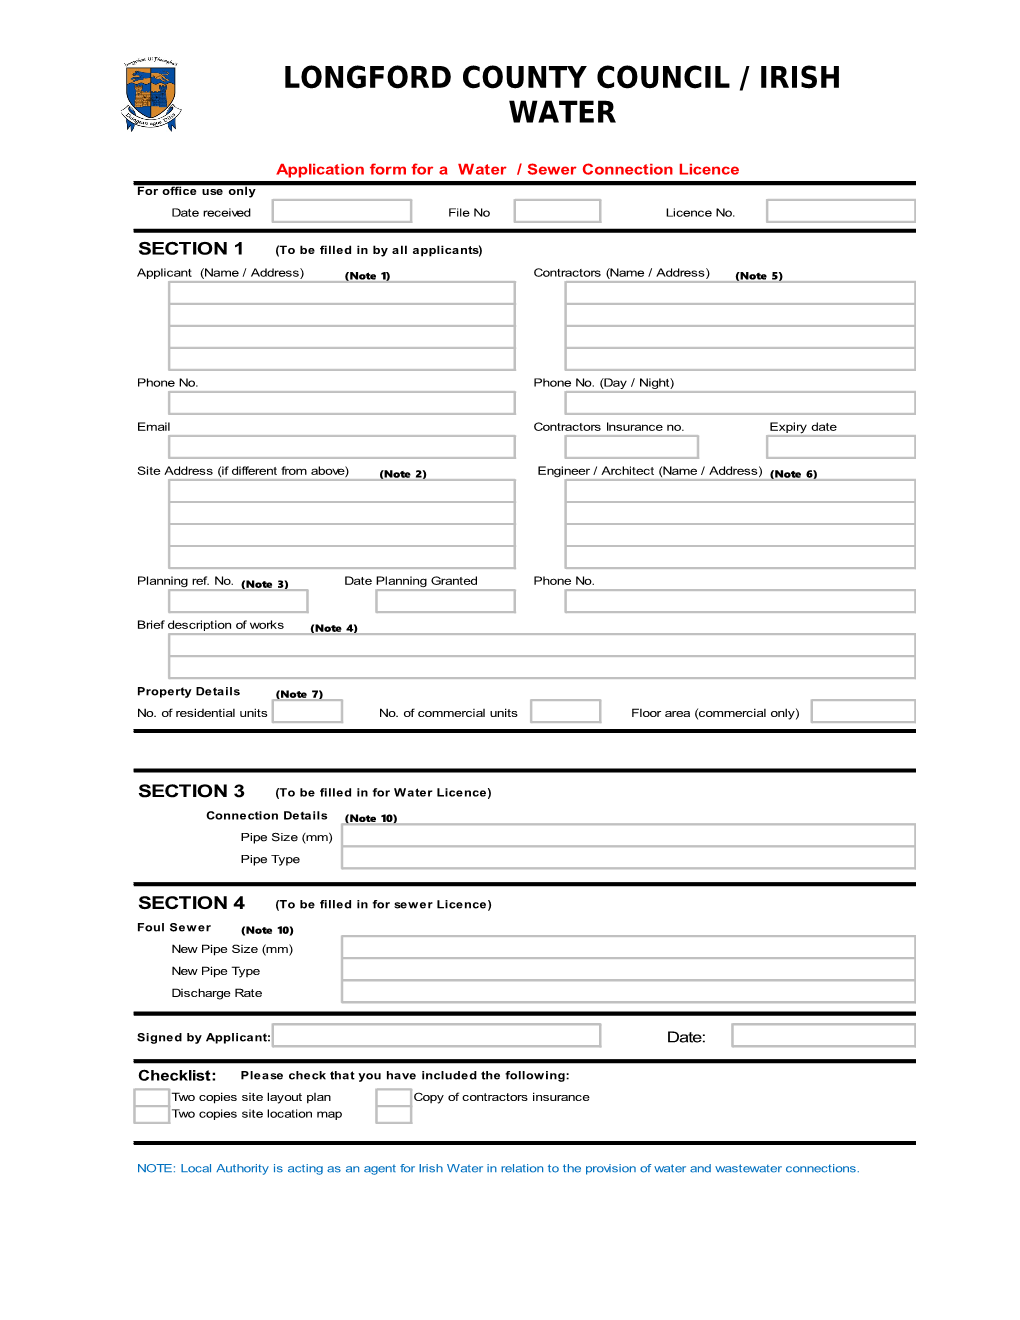 Form Should Be Completed by Applicant and Returned To